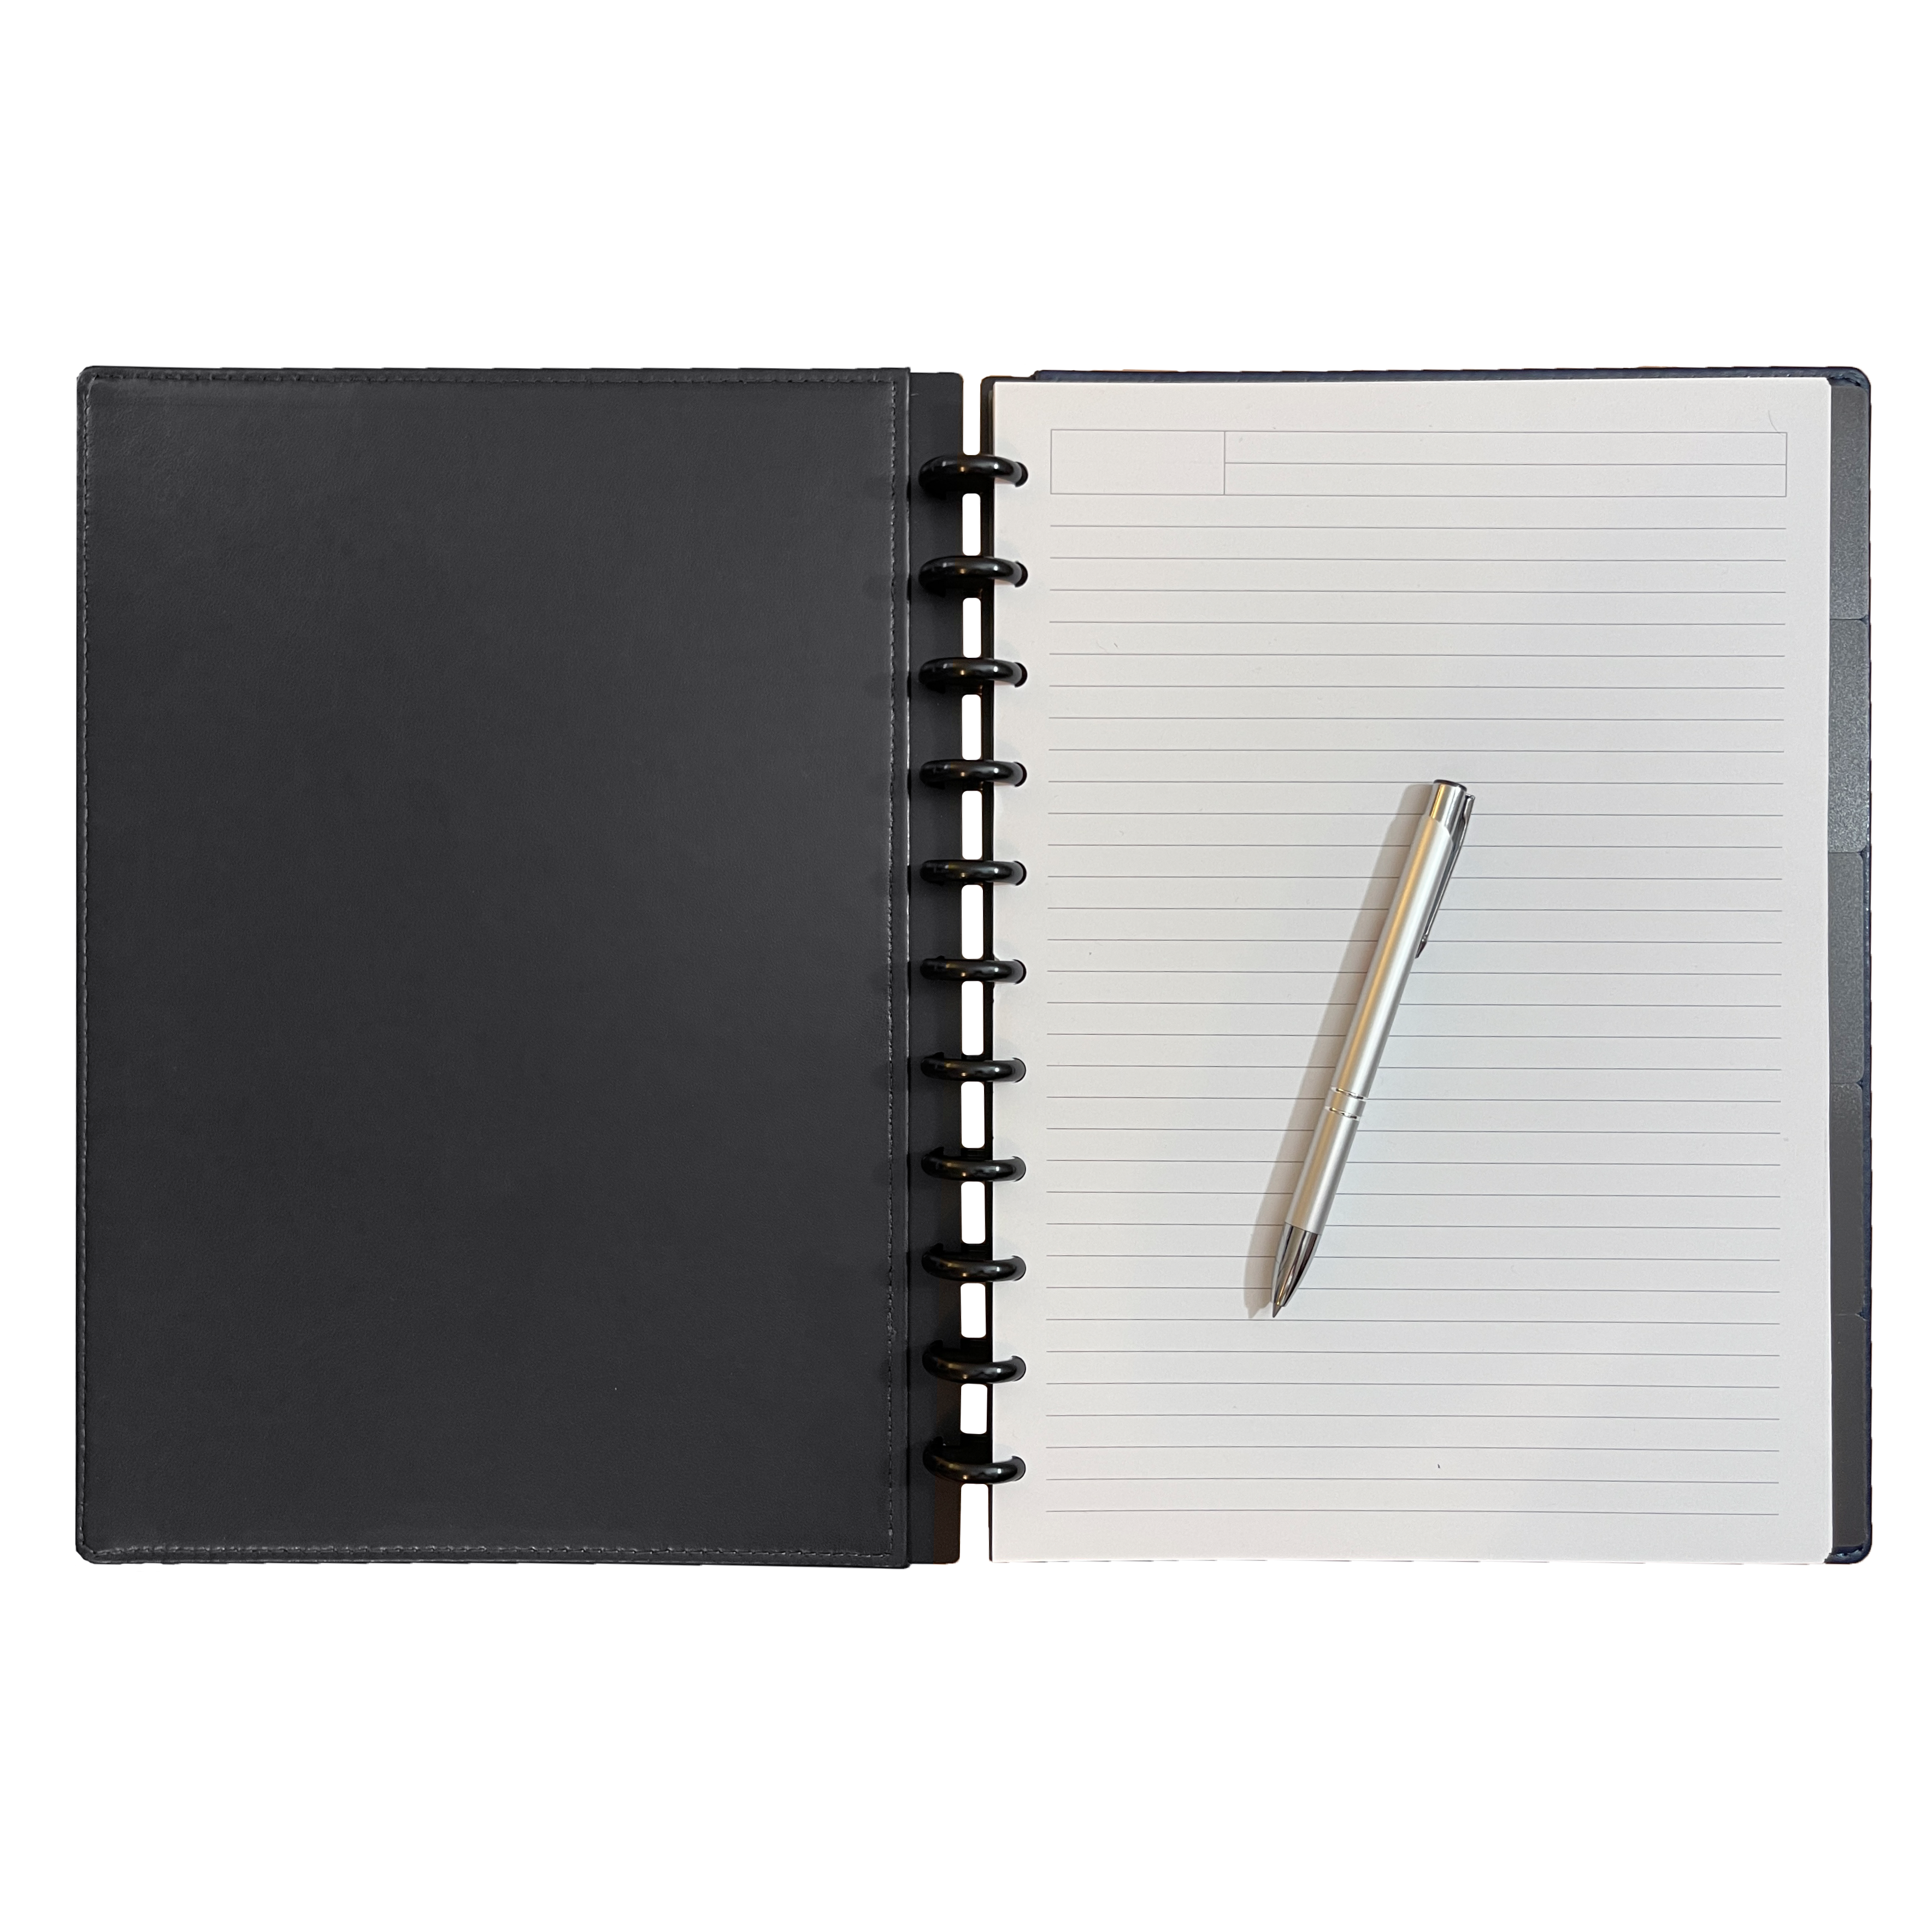 RINGNOTE LUX Edition Discbound Notebook (A4) - Black